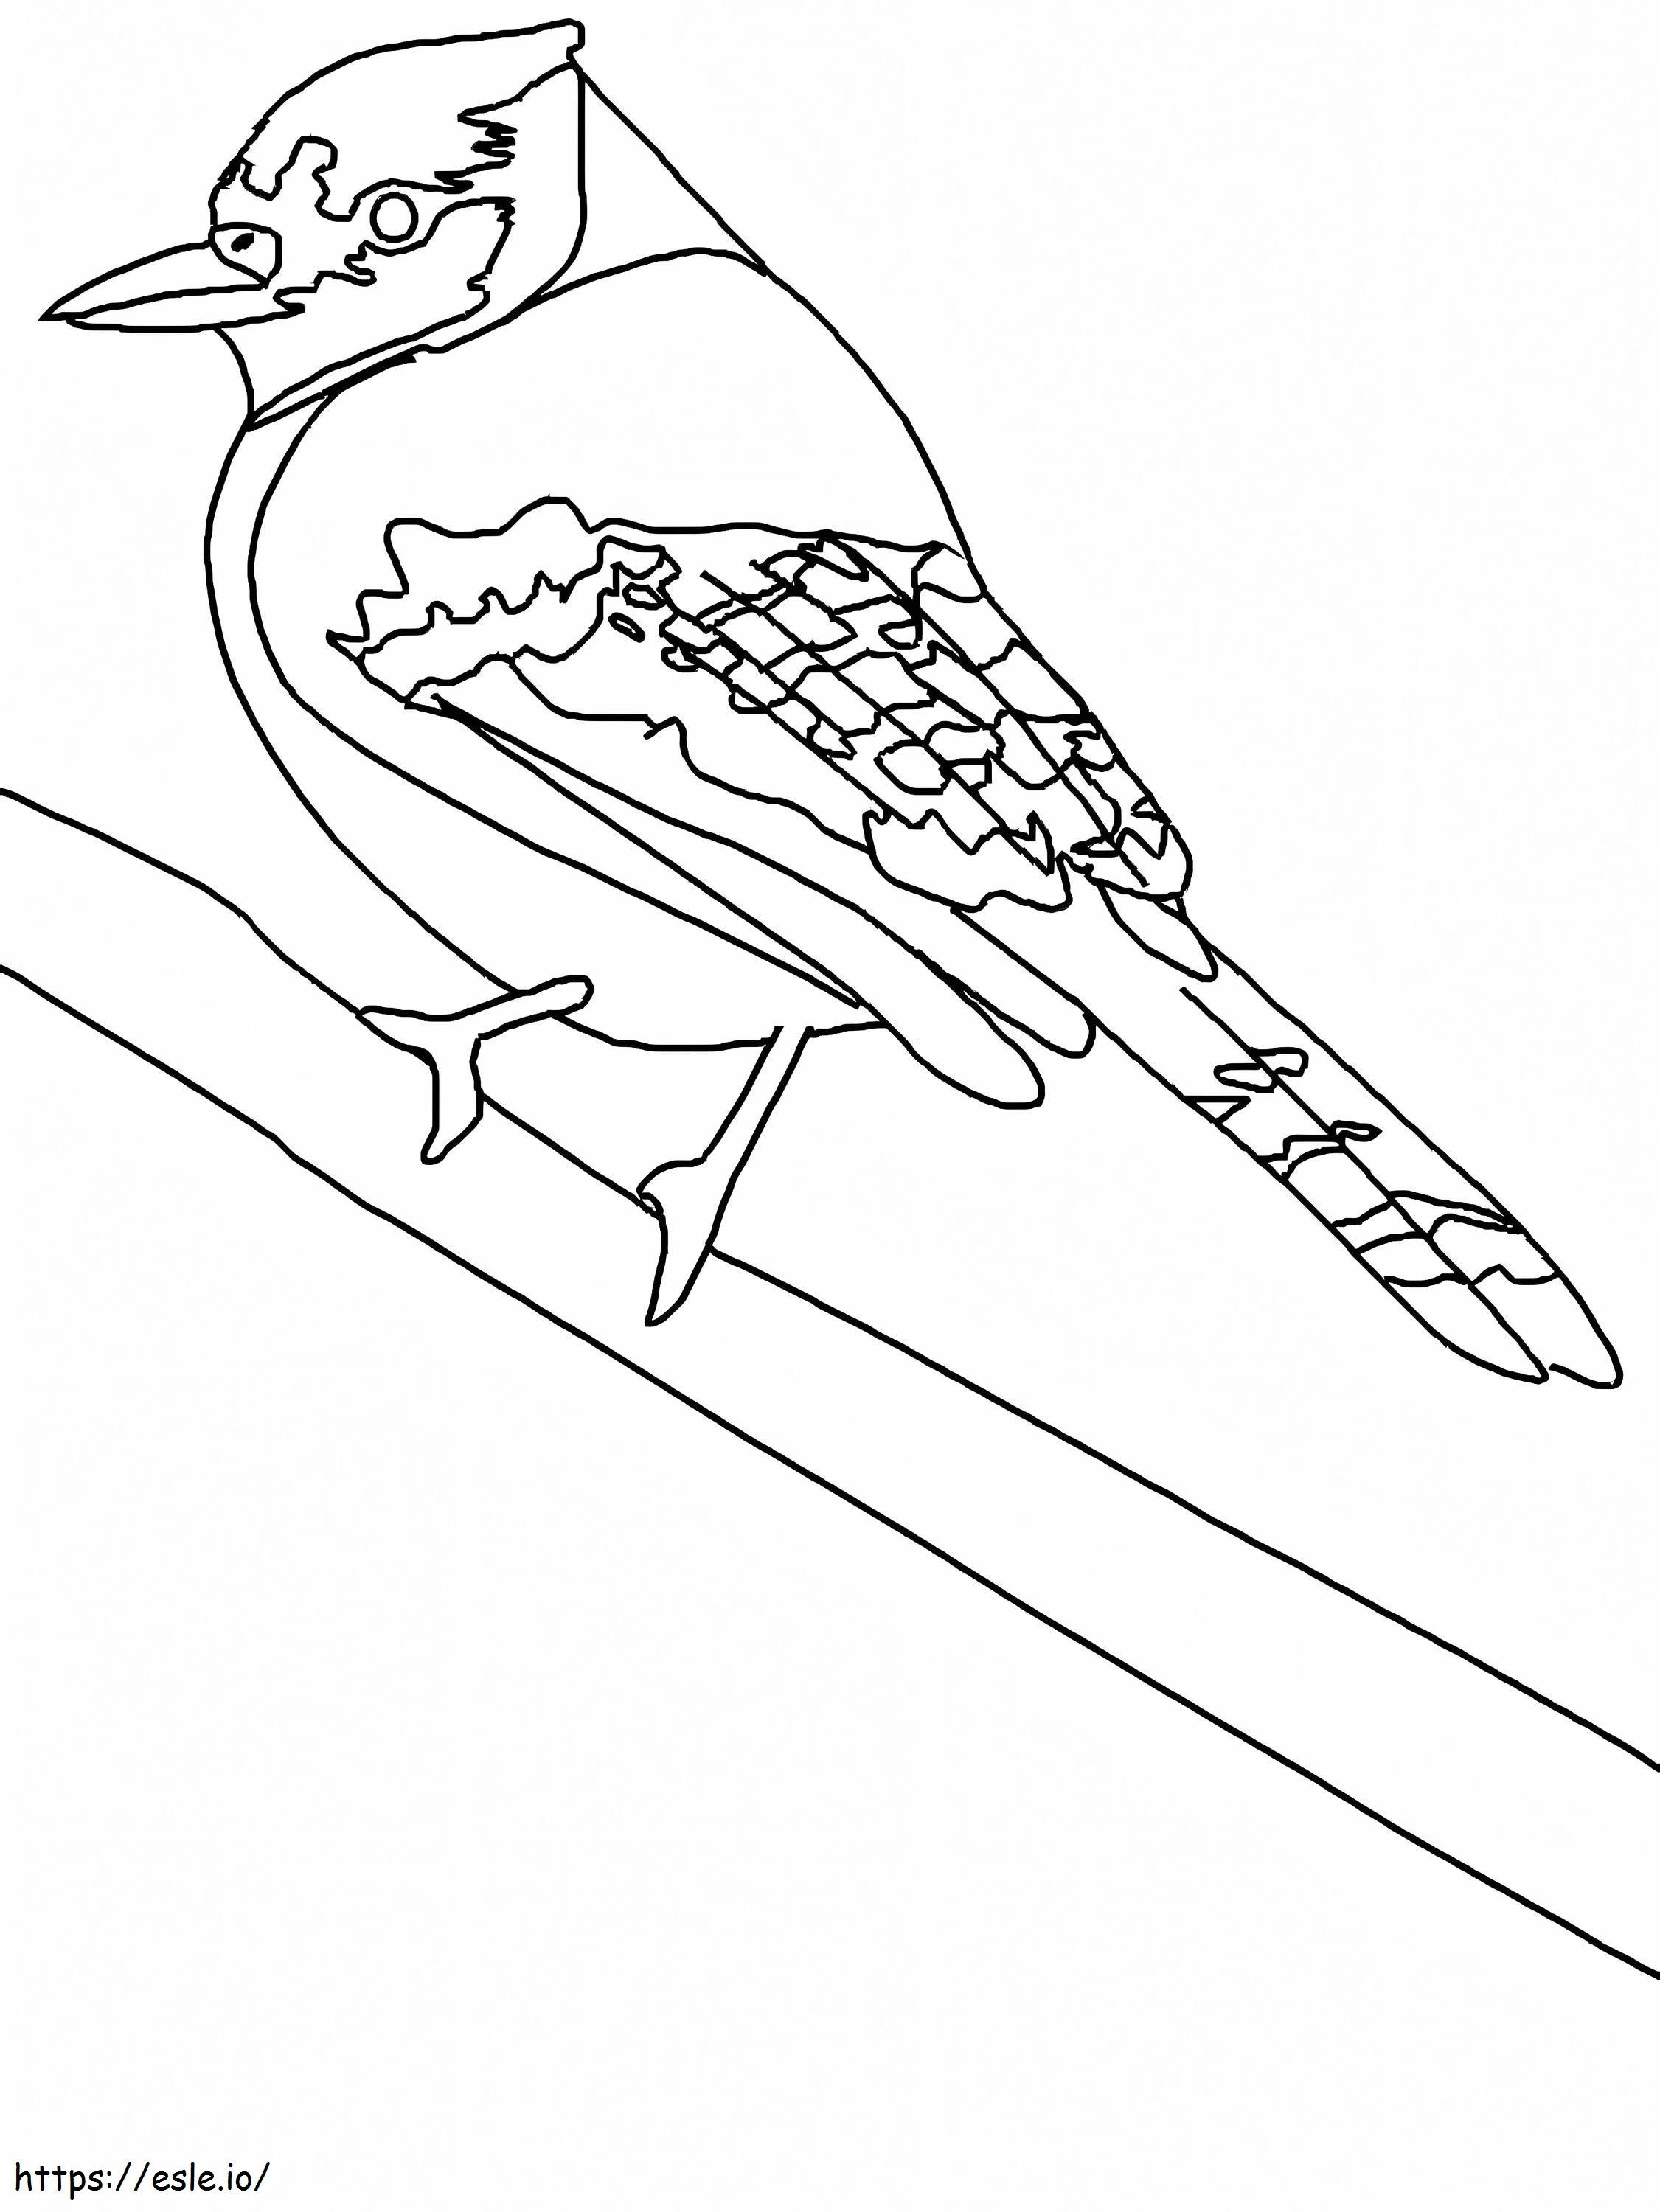 Blue Jay With Tags coloring page